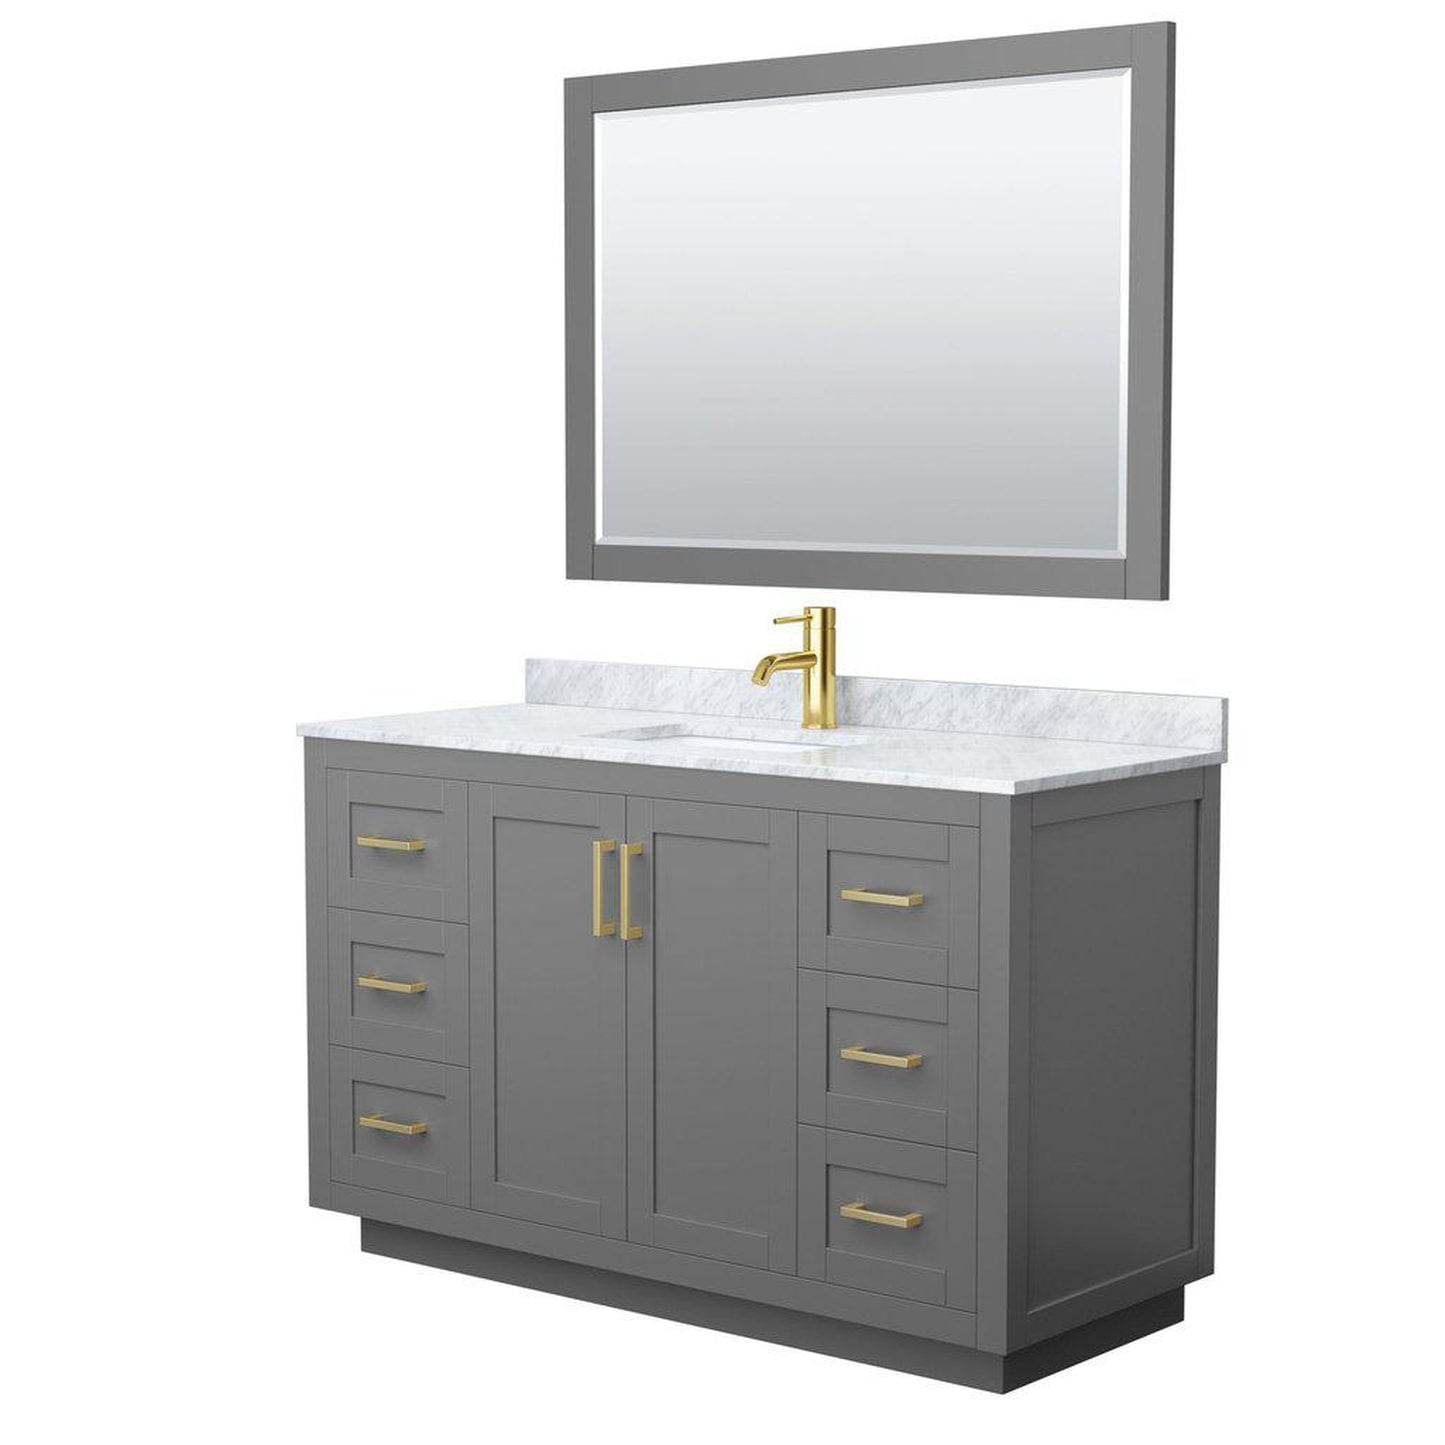 Wyndham Collection Miranda 54" Single Bathroom Dark Gray Vanity Set With White Carrara Marble Countertop, Undermount Square Sink, 46" Mirror And Brushed Gold Trim